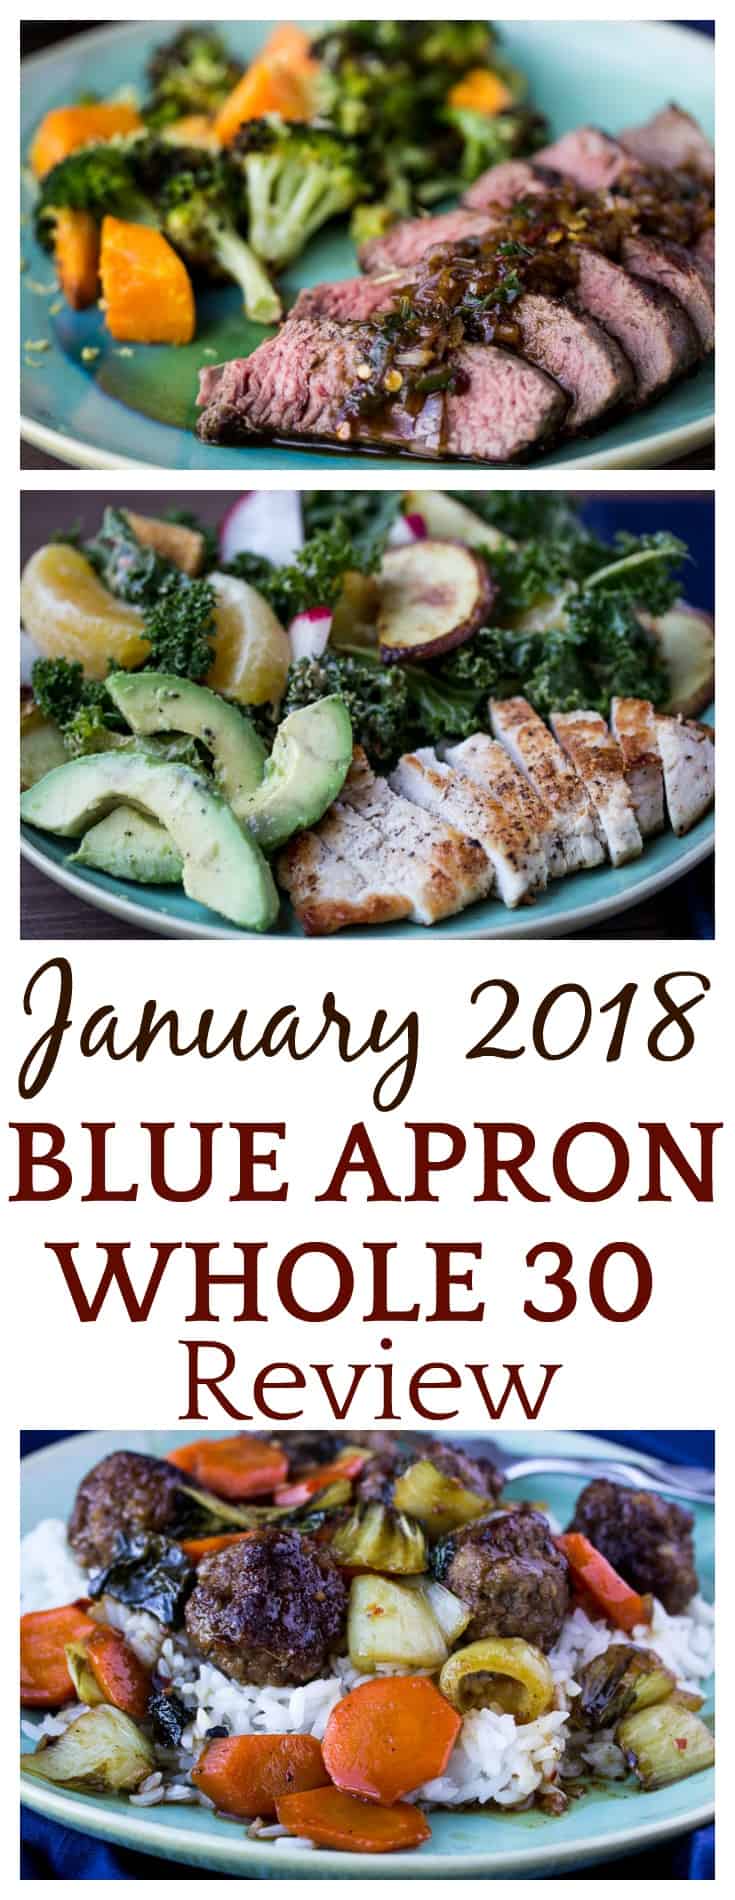 For 8 weeks in the beginning of 2018, Blue Apron teamed up with Whole 30 to bring you even more healthier meal options! This is a Blue Apron Whole 30 Review for just one of those weeks! | #blueapron #blueapronmeals #whole30 #whole30recipes #mealkit